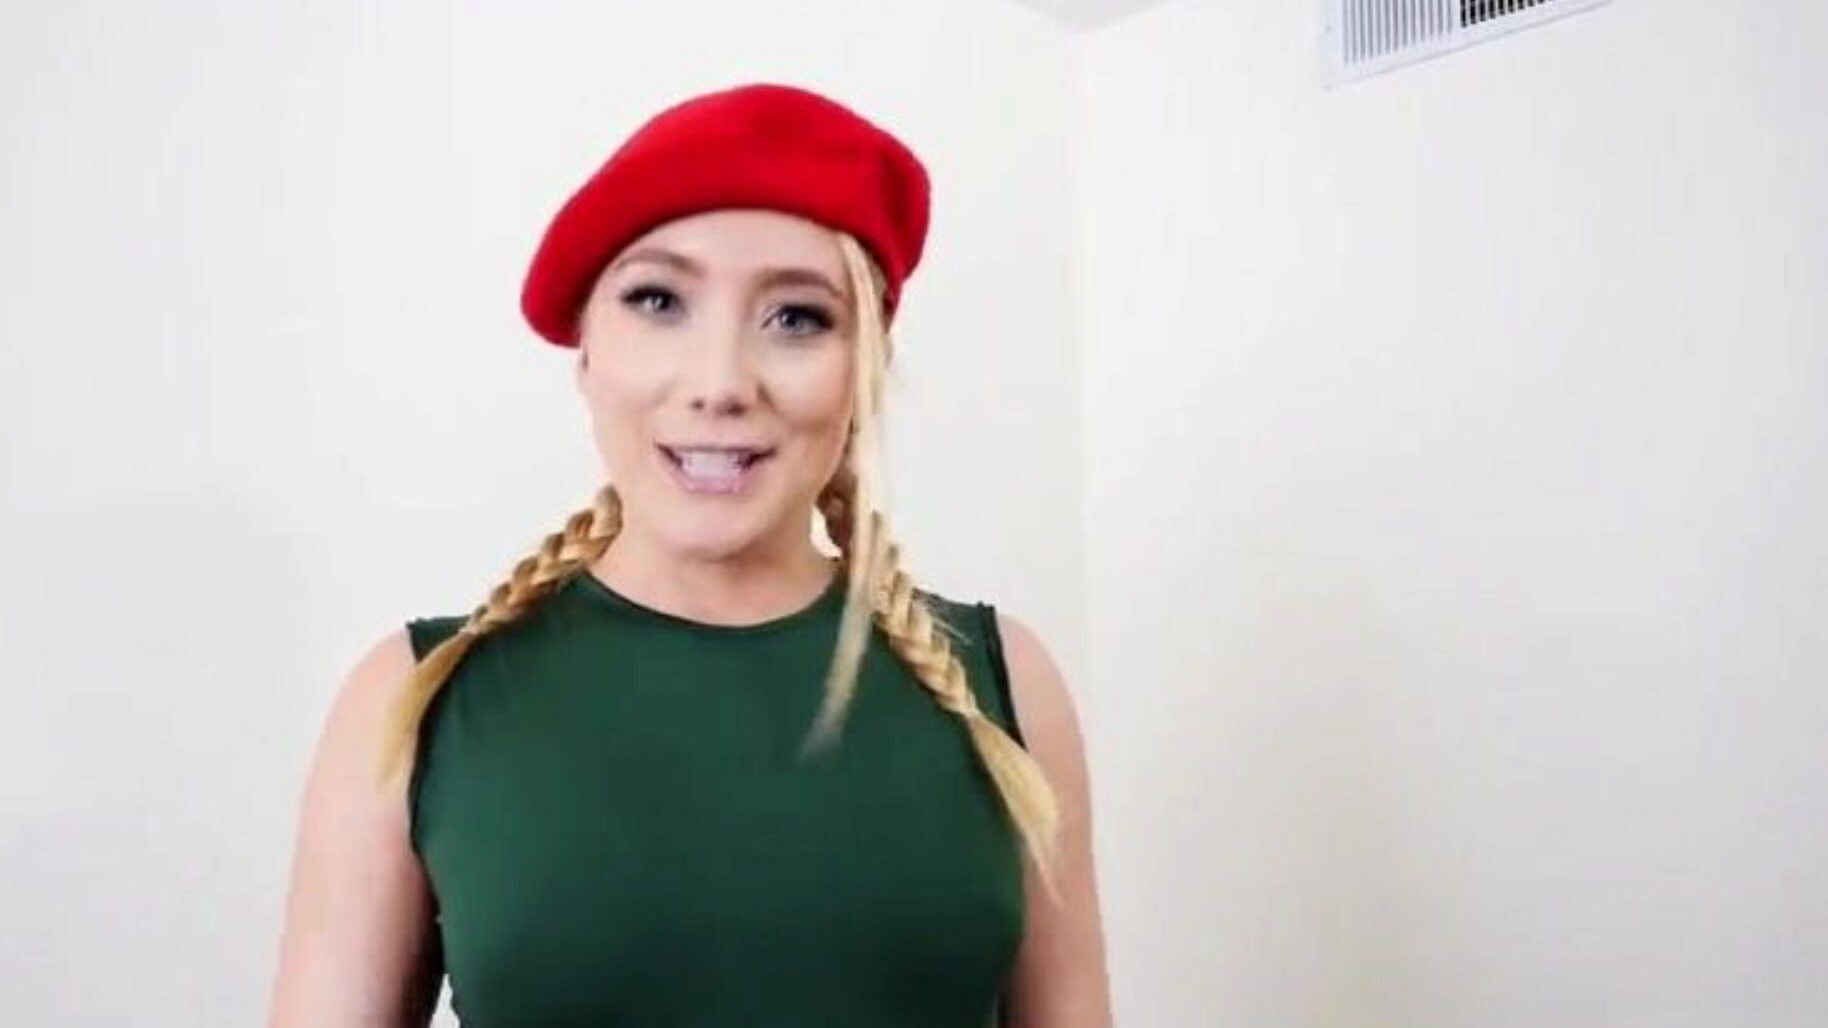 Mofos - I Know That Cutie - Episode Game Cosplay Fuck starring  AJ Applegate and Chad Alva